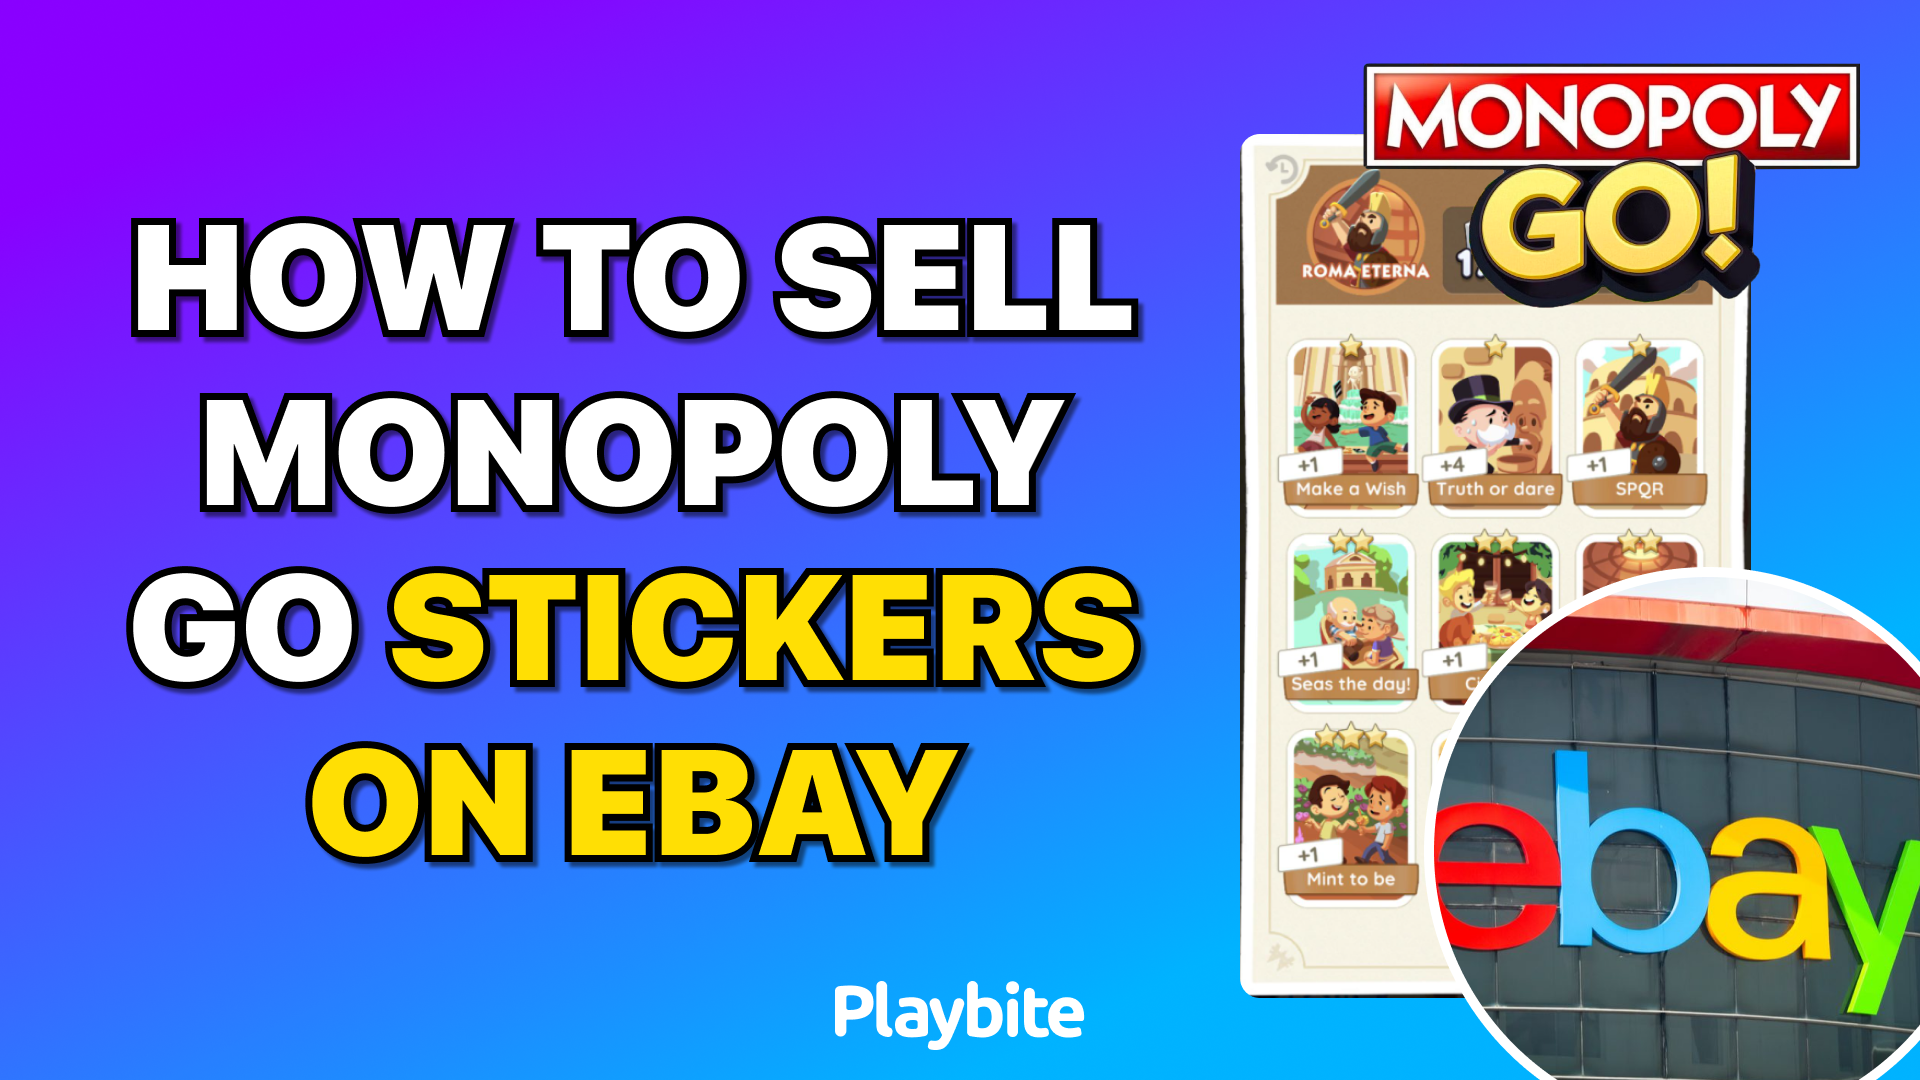 How to Sell Monopoly Go Stickers on eBay